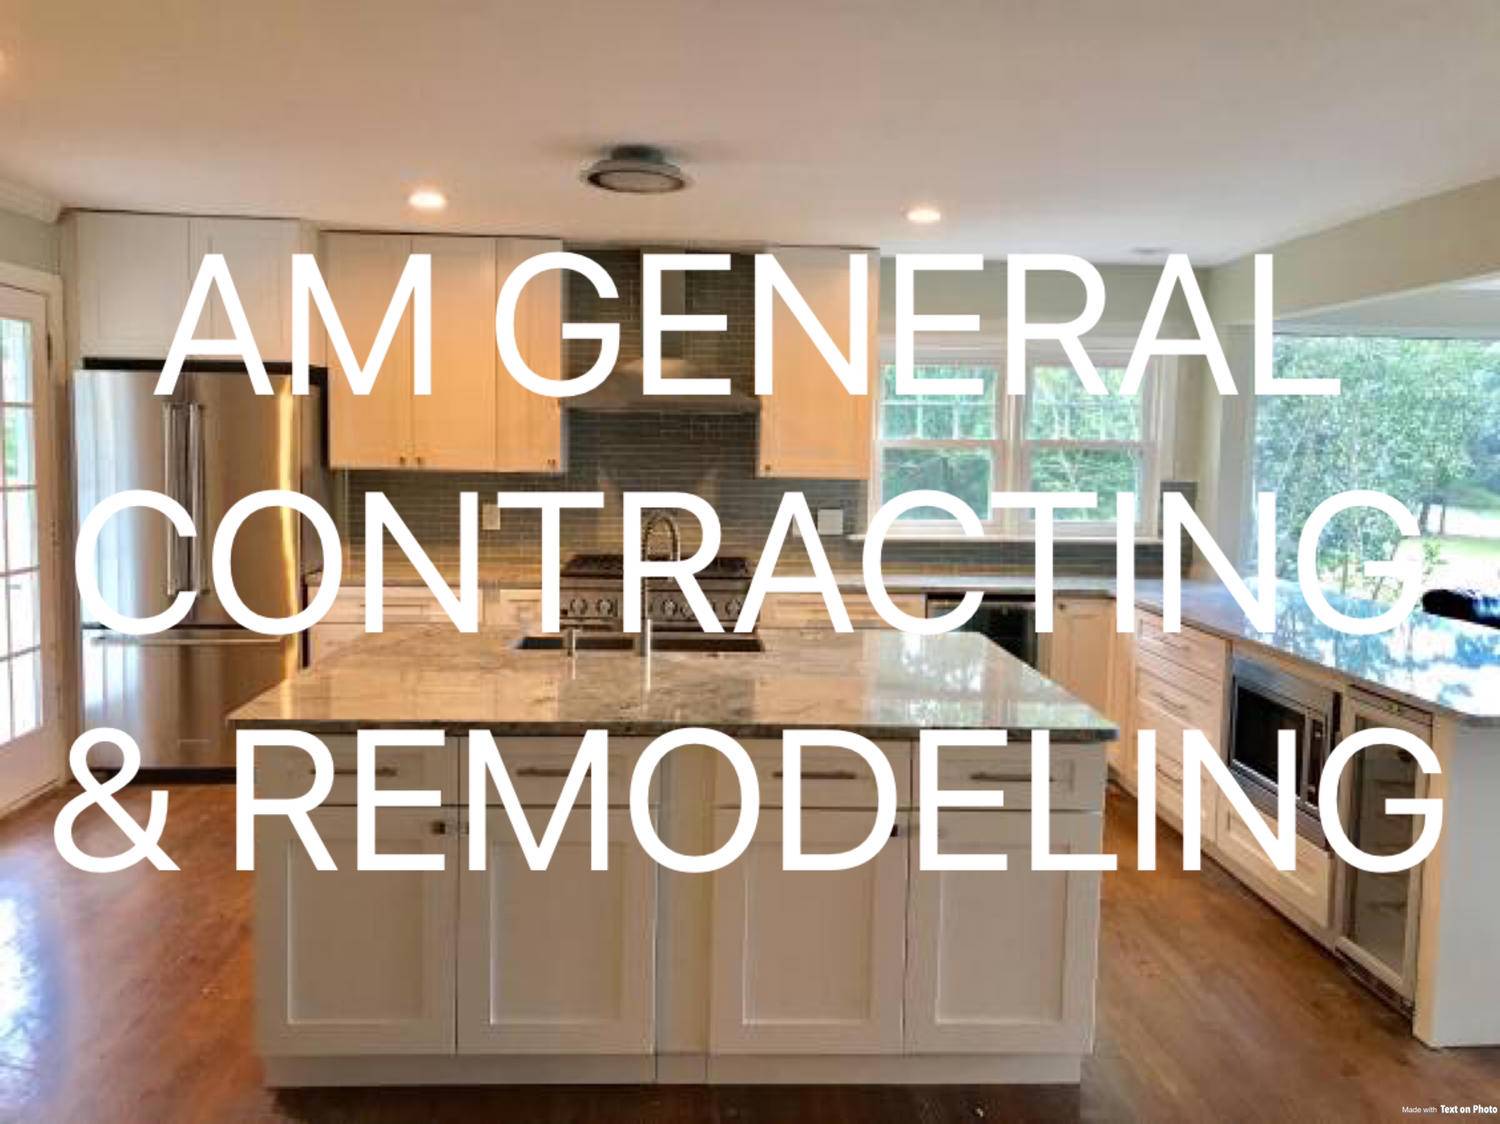 AM General Contracting & Remodeling LLC Photo